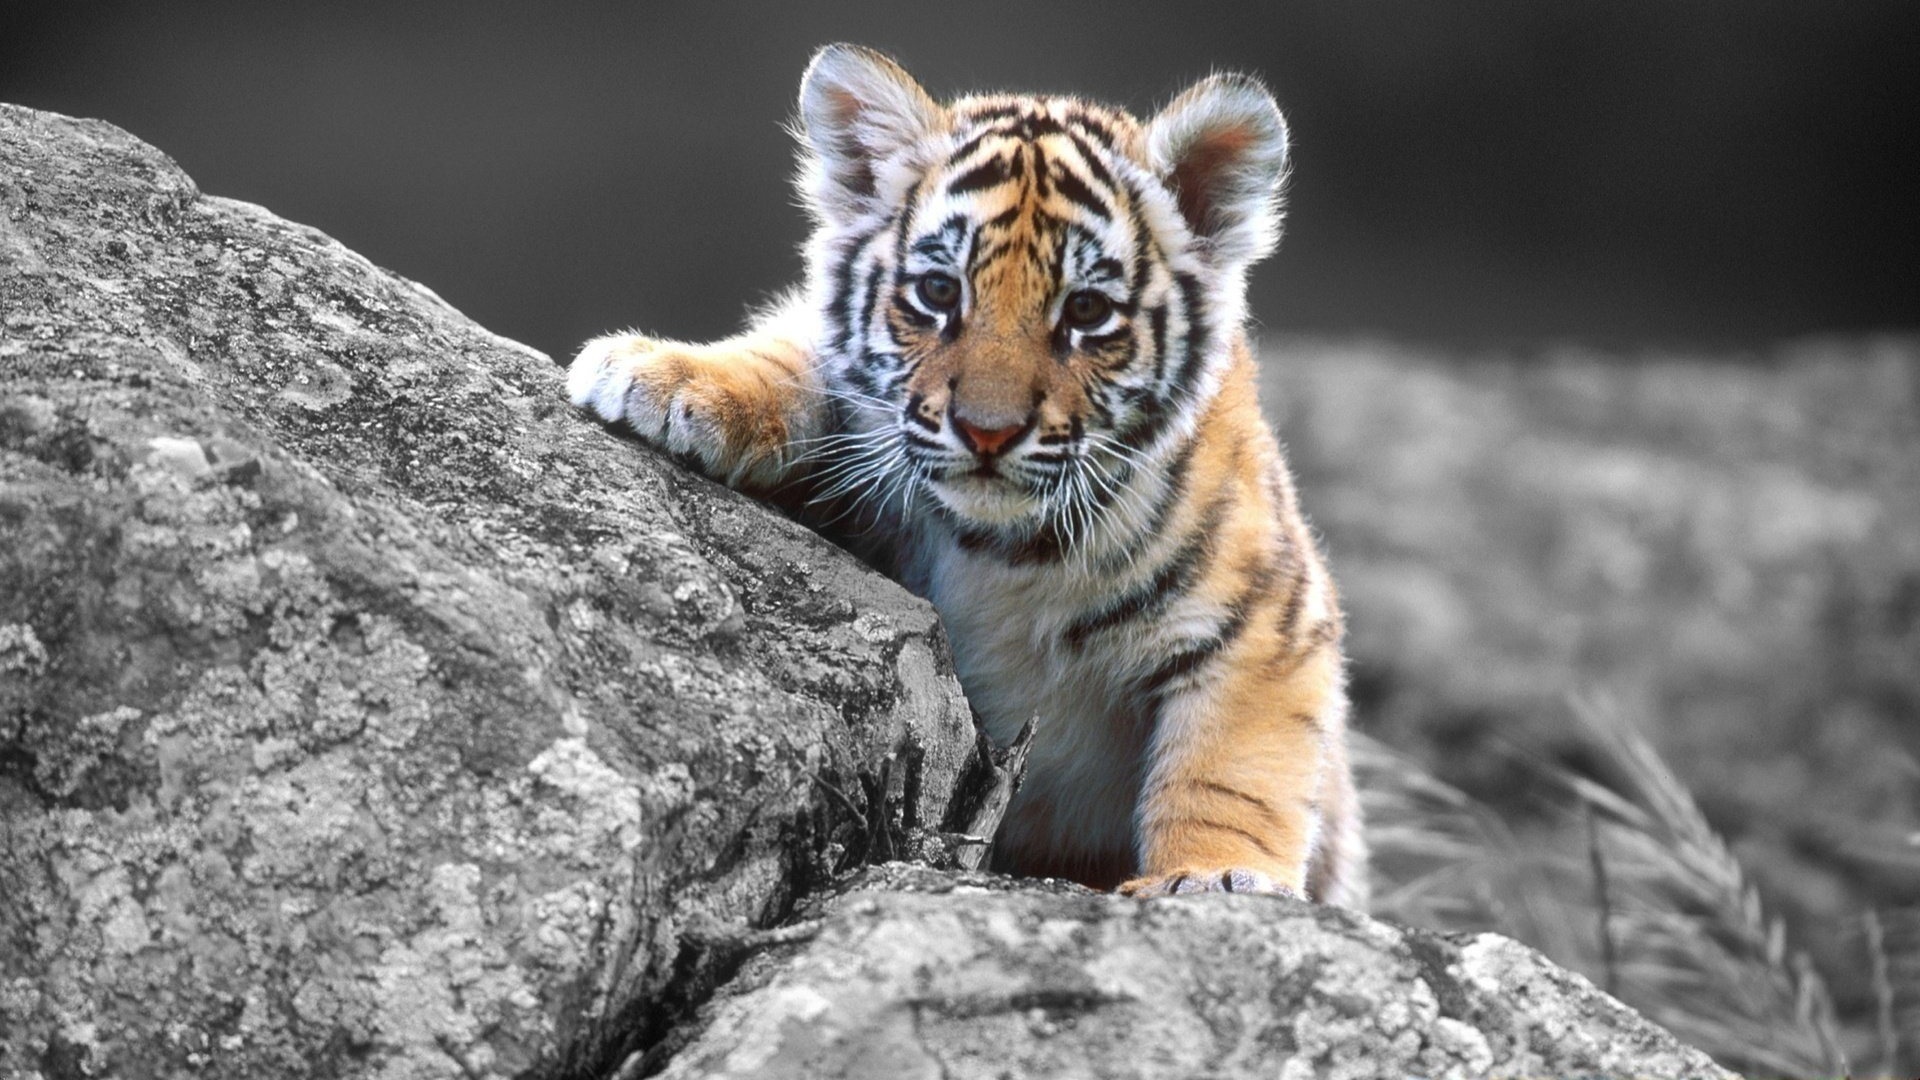 Cute Baby Tiger 30499 1600x1200 px